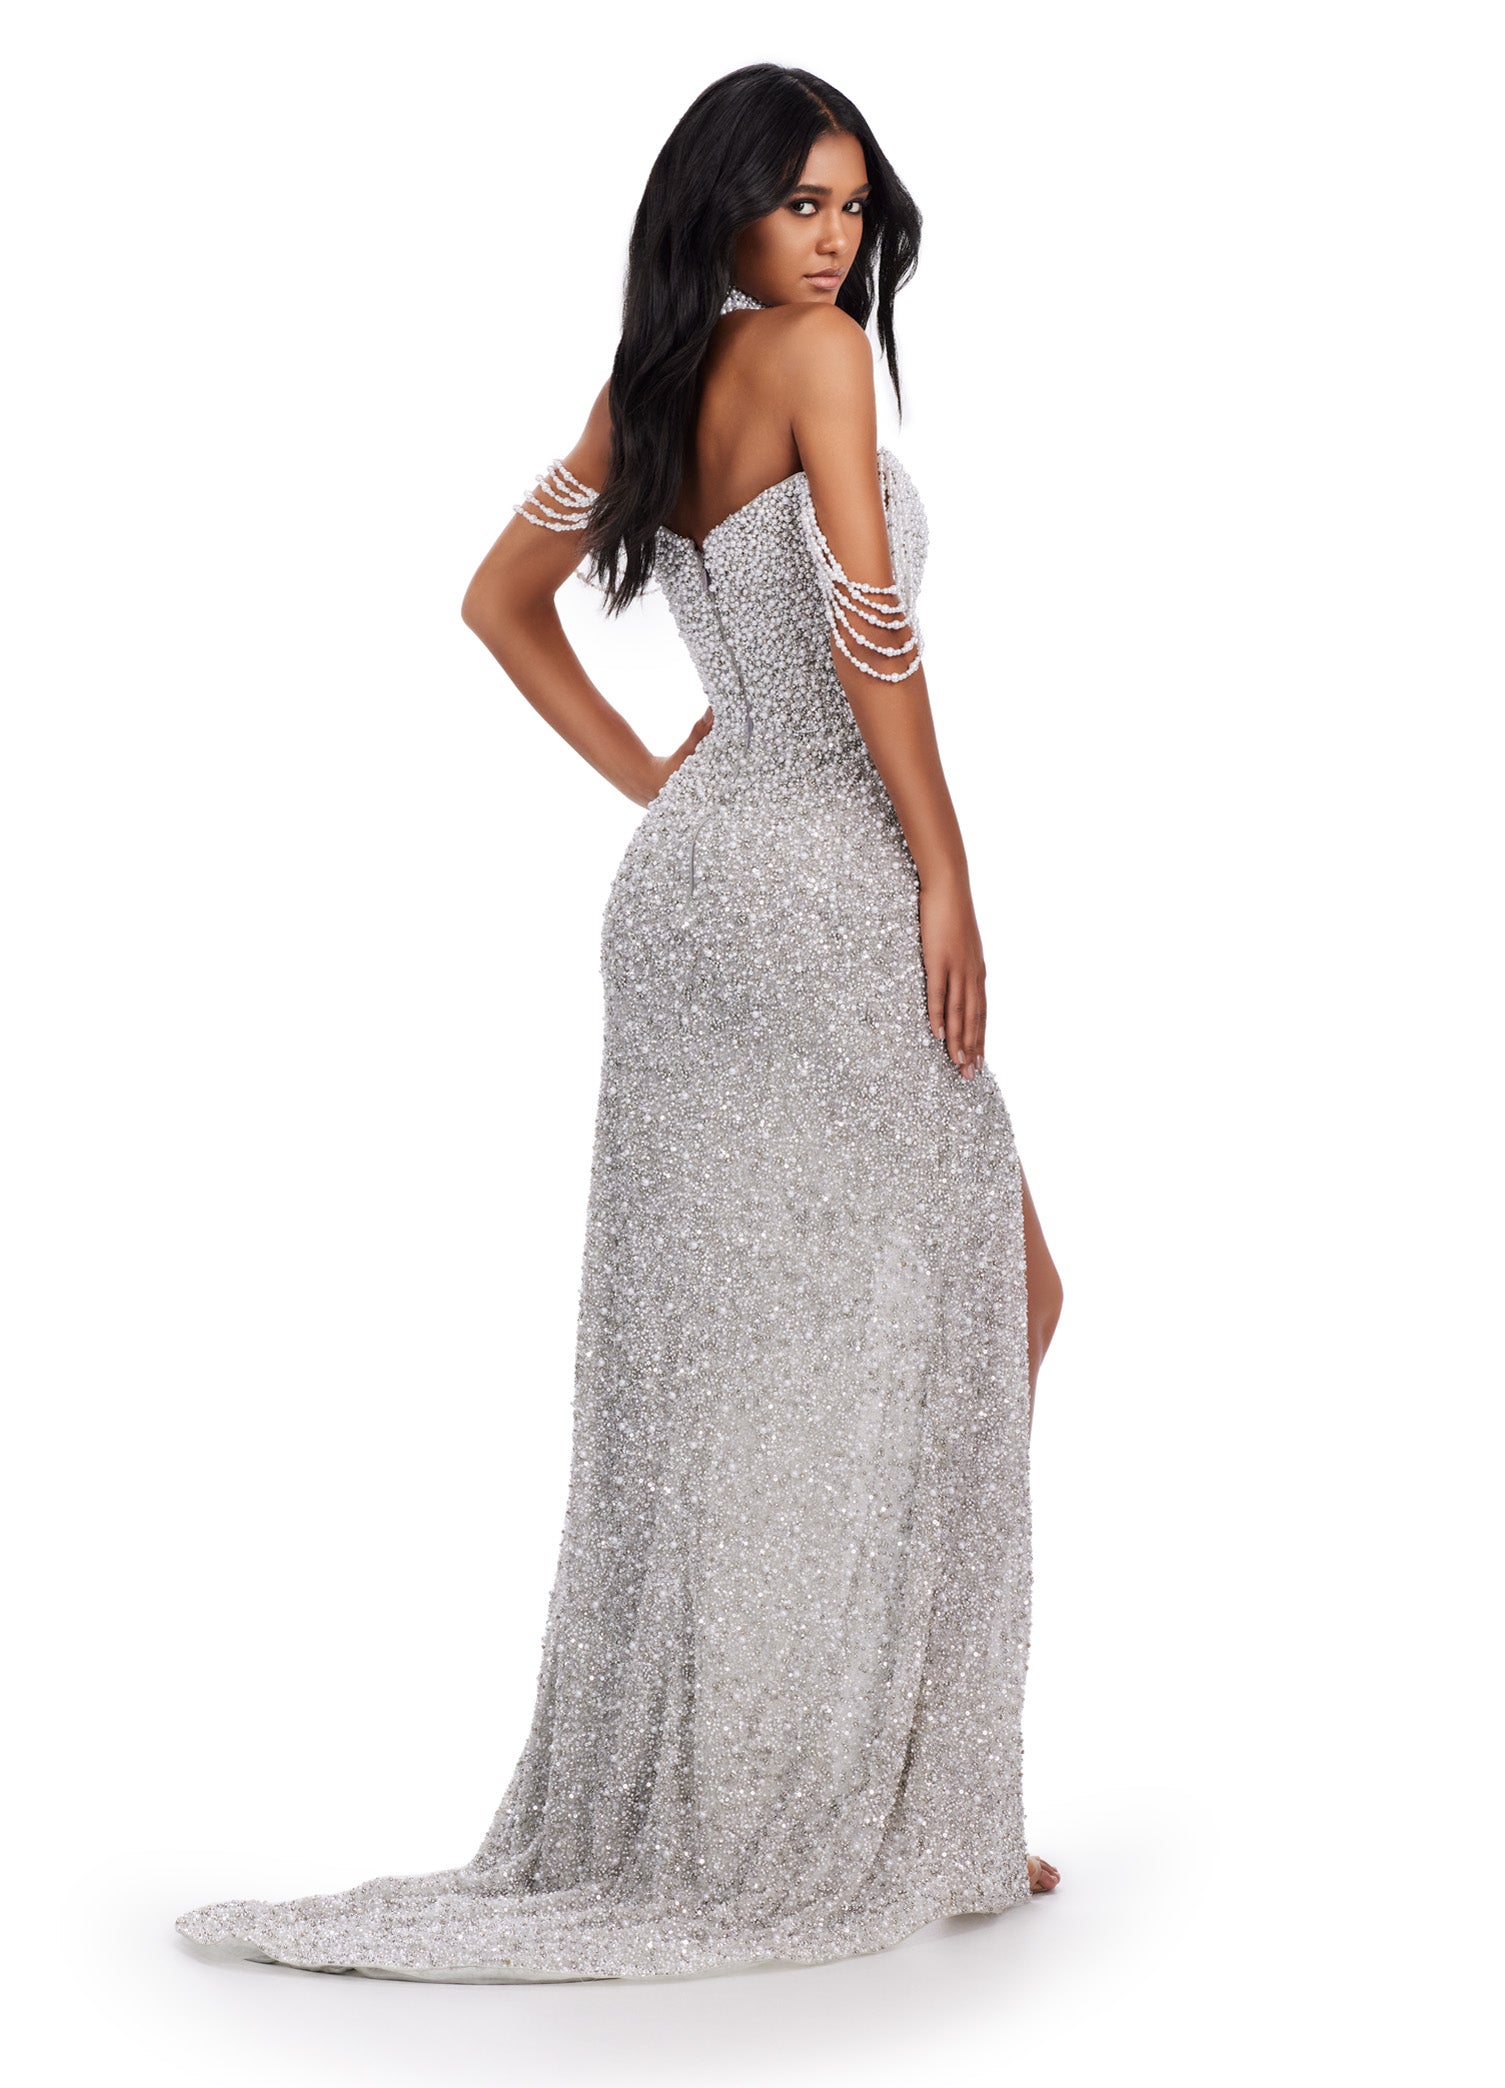 Expertly crafted by Ashley Lauren, this 11598 Long Prom Dress is a true work of art. With its full beaded design and delicate pearls and crystals, this formal gown exudes elegance and sophistication. Perfect for prom or pageants, this dress is sure to make you stand out and shine. Serve a look in this fully beaded gown encrusted with pearls and crystals. This dress features an off shoulder design and a fully beaded matching choker.